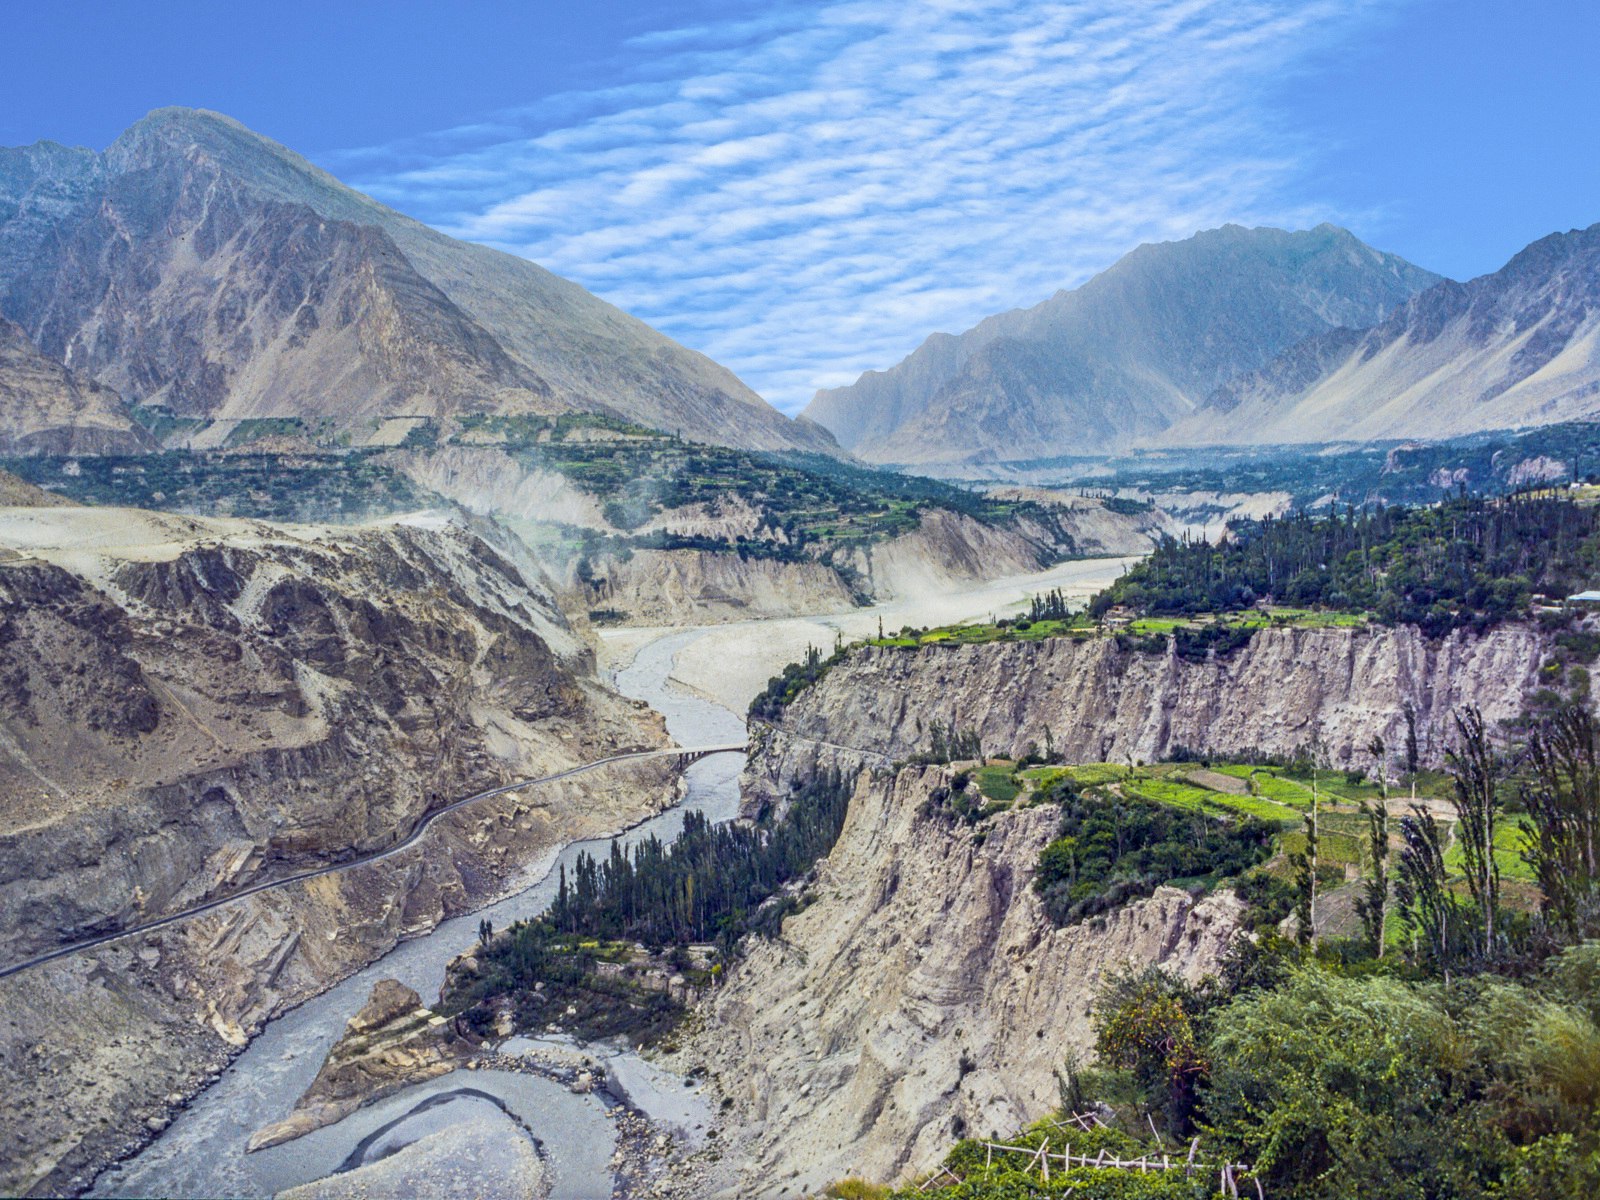 A section of the Karakoram Highway running through a valley in Karimabad in Pakistan © travelview /Shutterstock